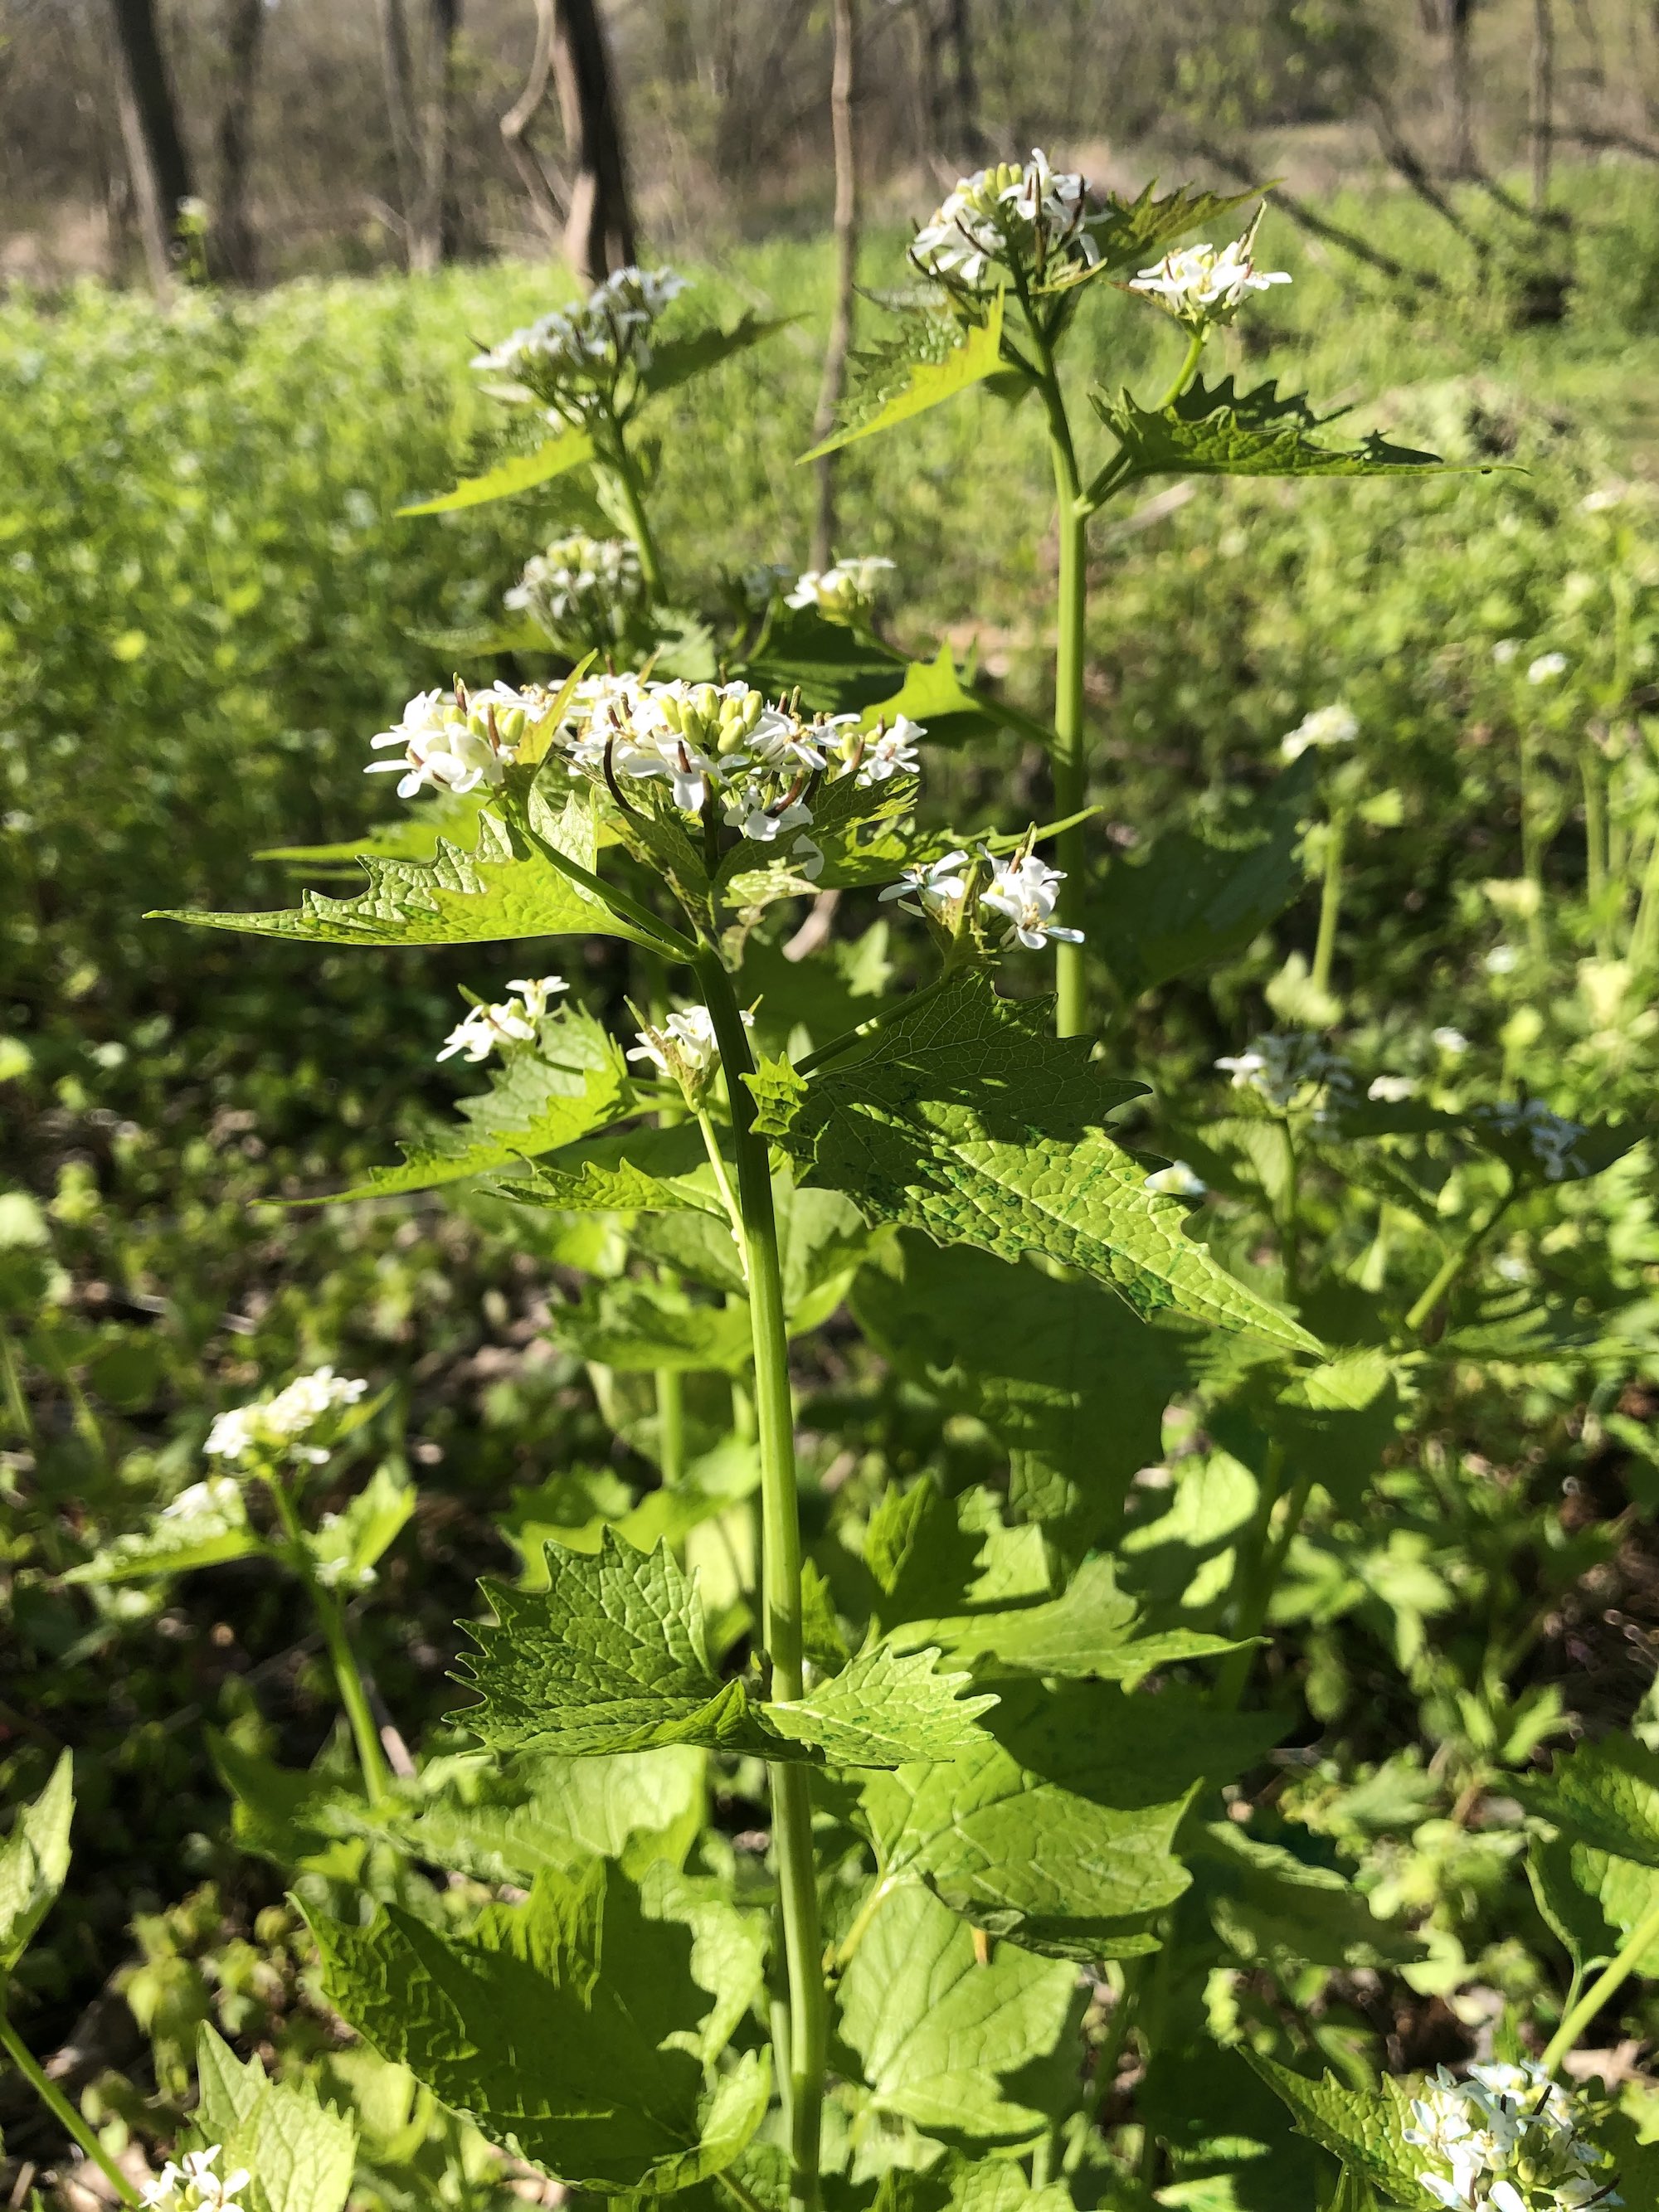 Garlic Mustard by Duck Pond in Madison, Wisconsin on May 12, 2020.